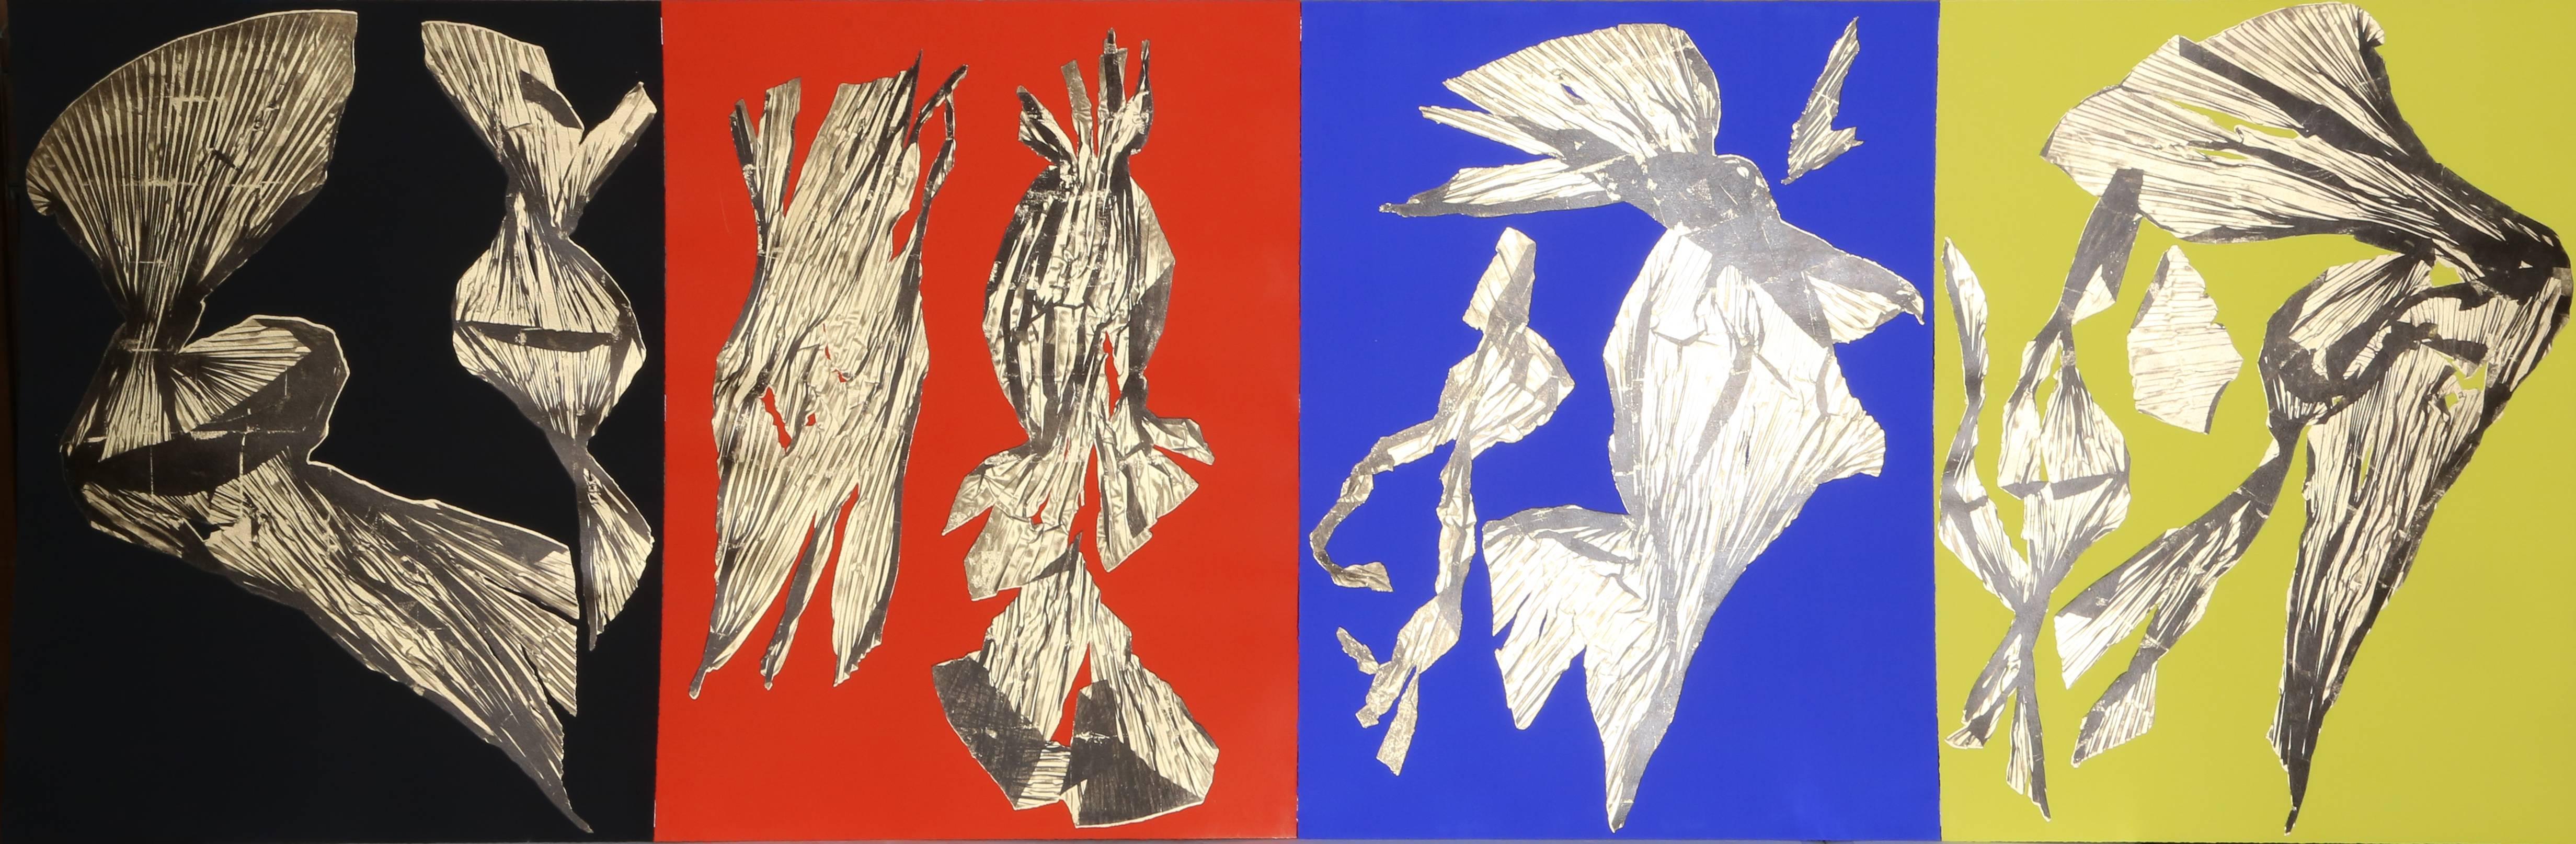 Dual Nature (Quad), Suite of Four Silkscreens with Gold Leaf by Lynda Benglis